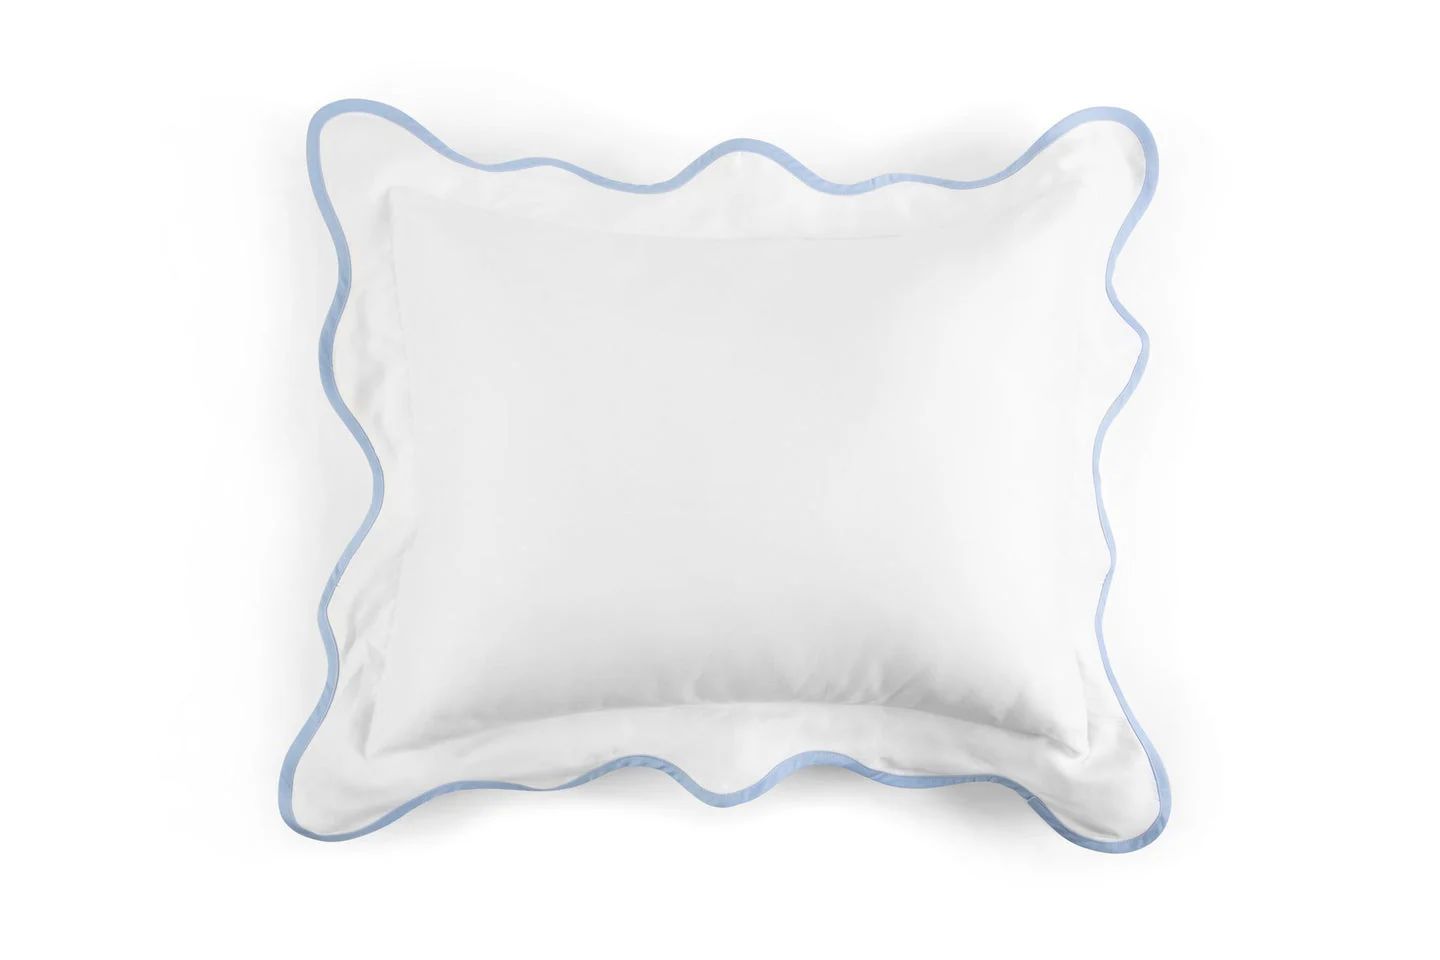 The Petite Pippen Travel Pillow | Pippen House